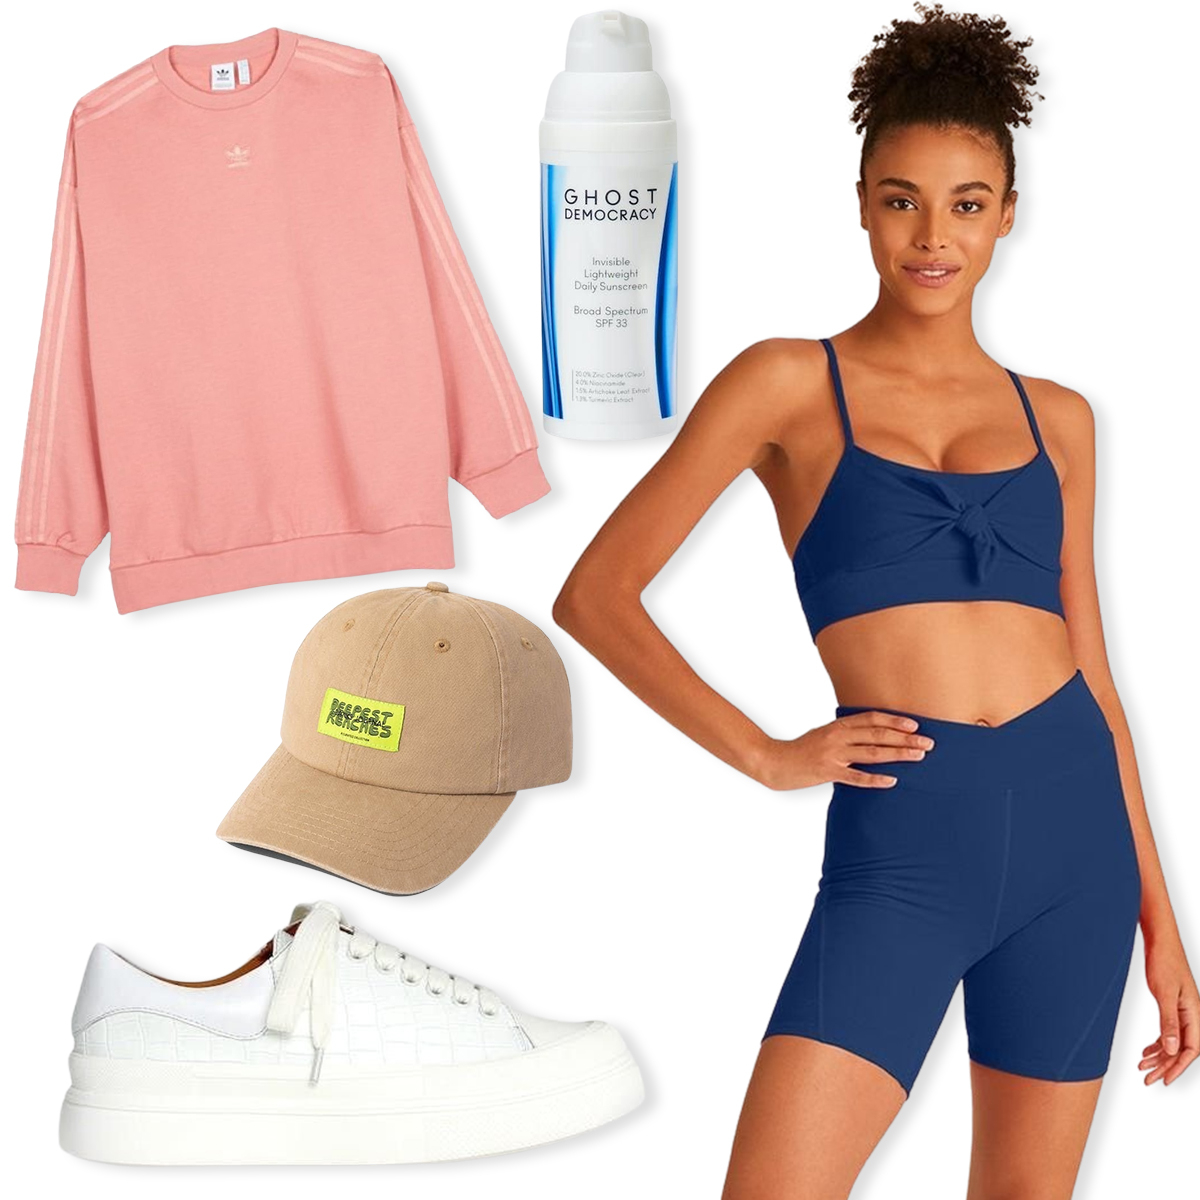 New Year, New Workout Motivation: This Season's Hottest Workout Wear –  Sunseeking in Style